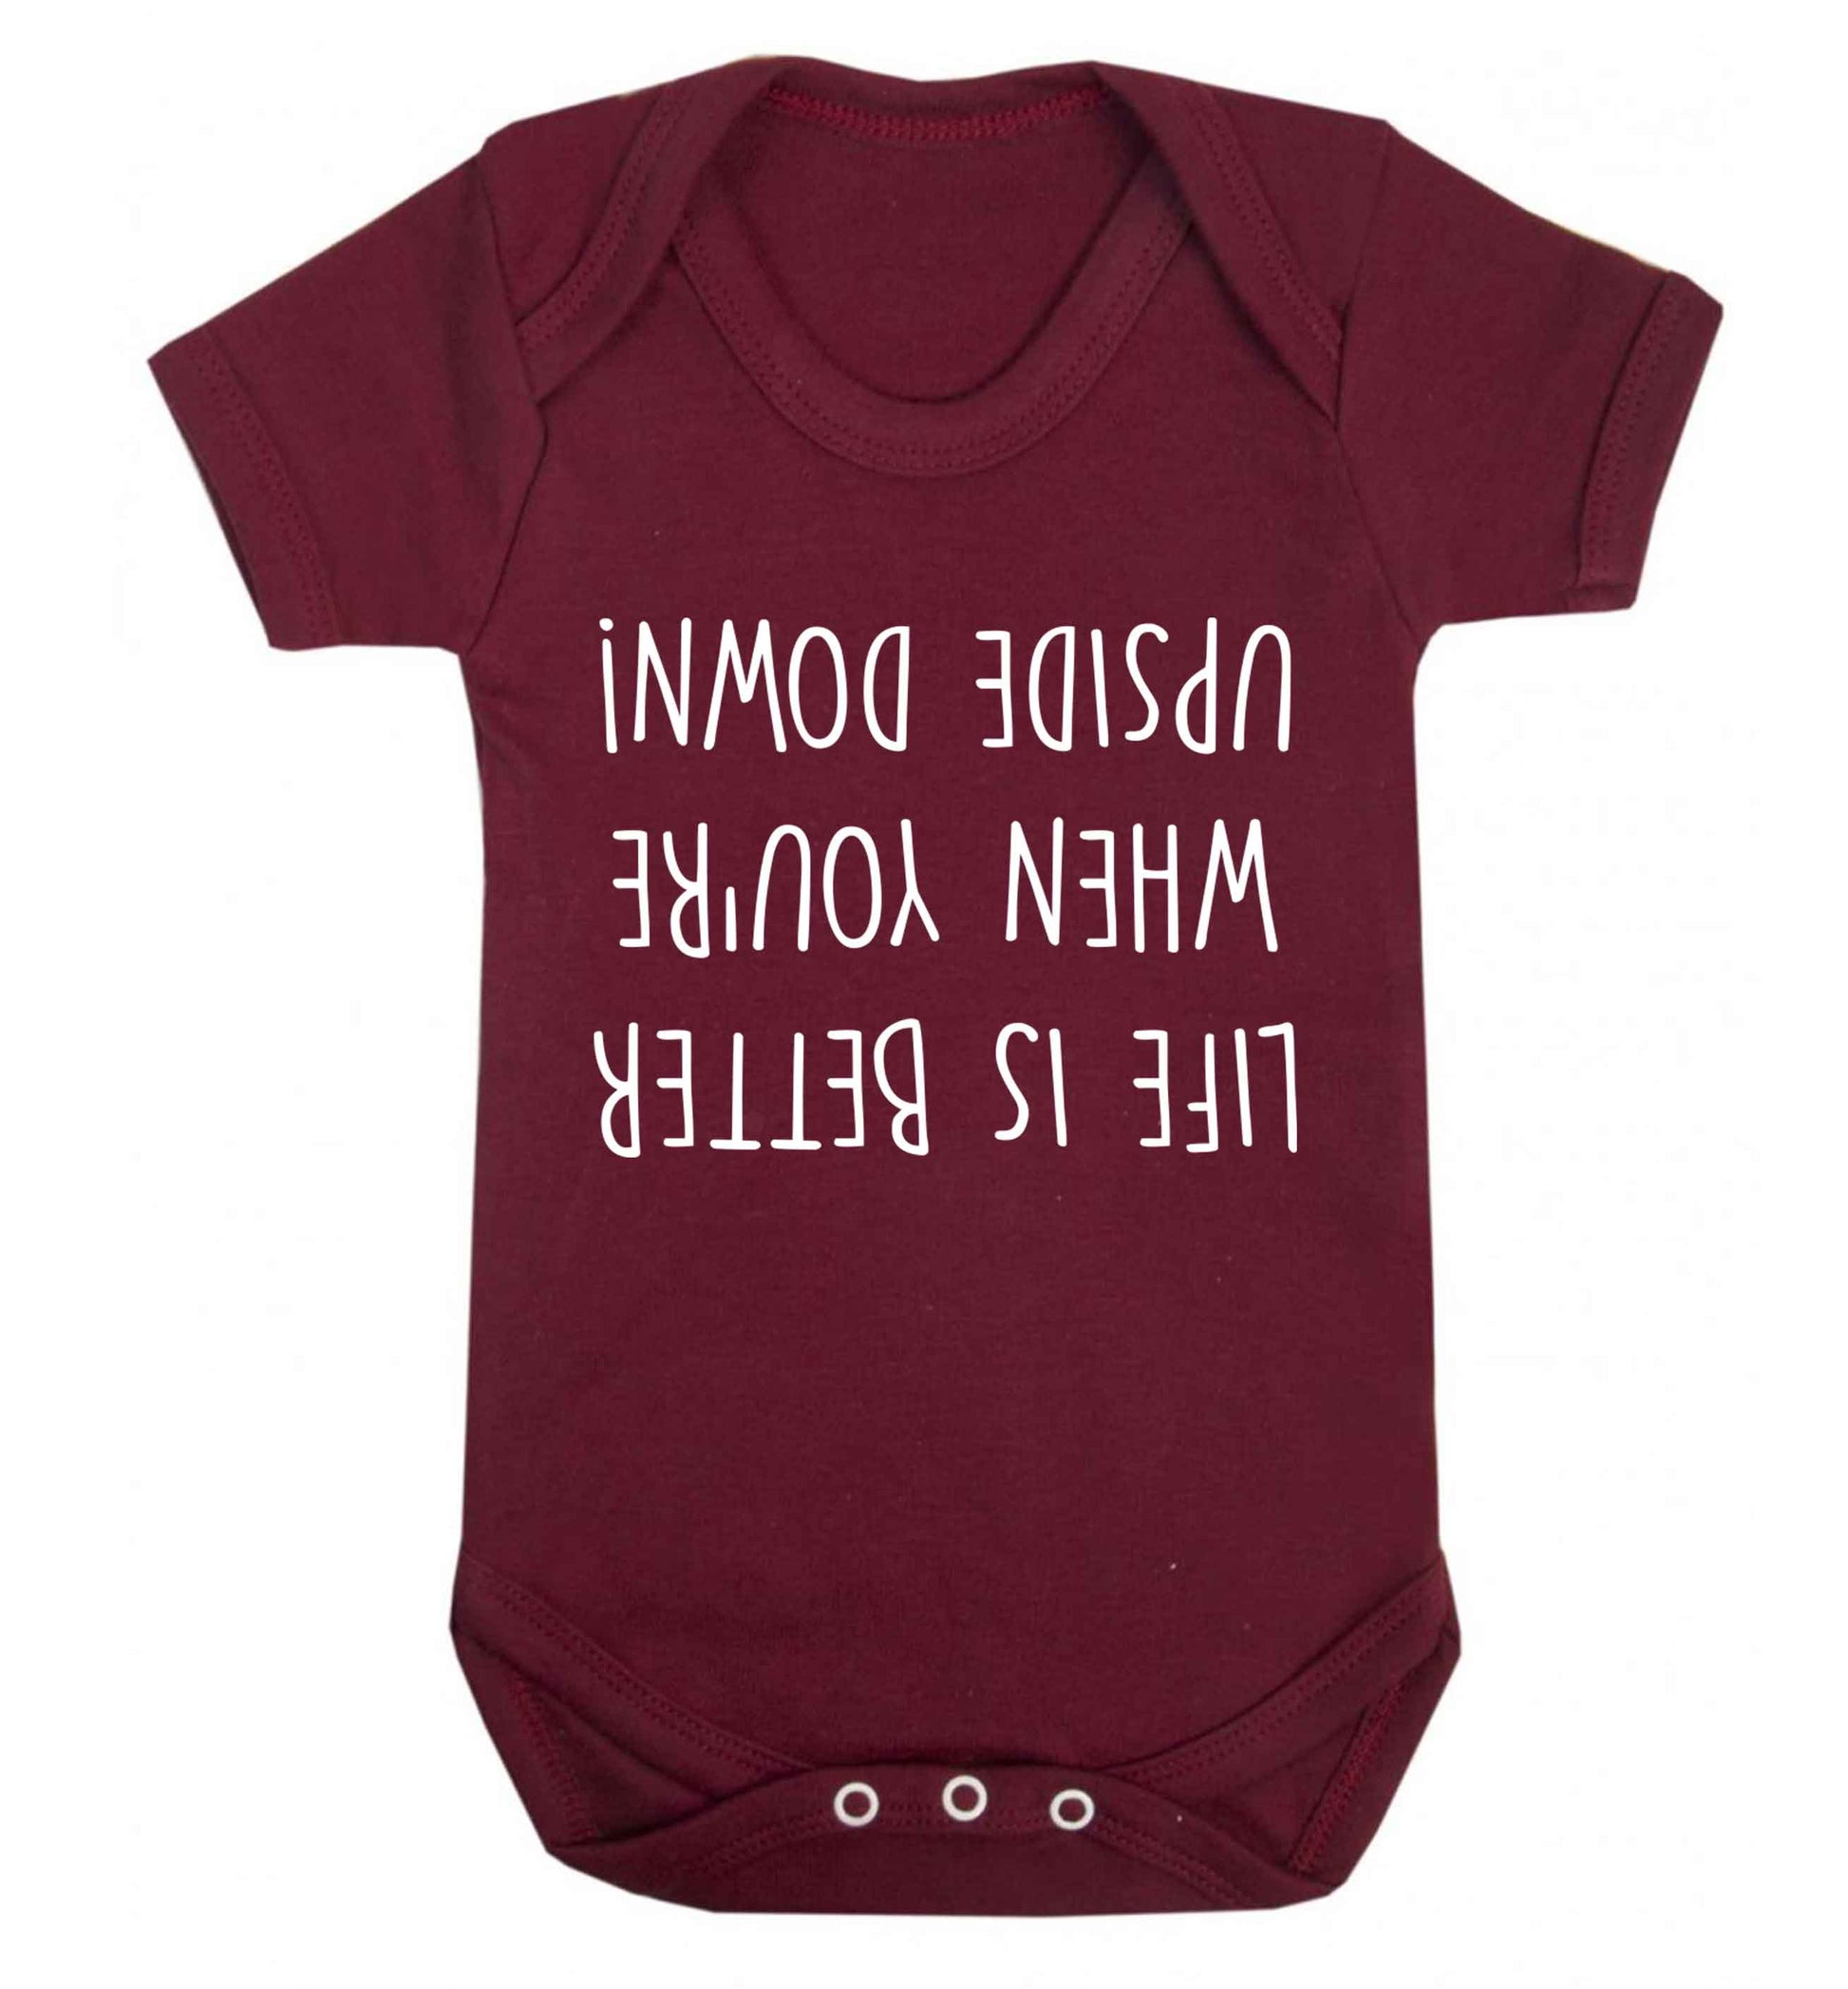 Life is better upside down Baby Vest maroon 18-24 months